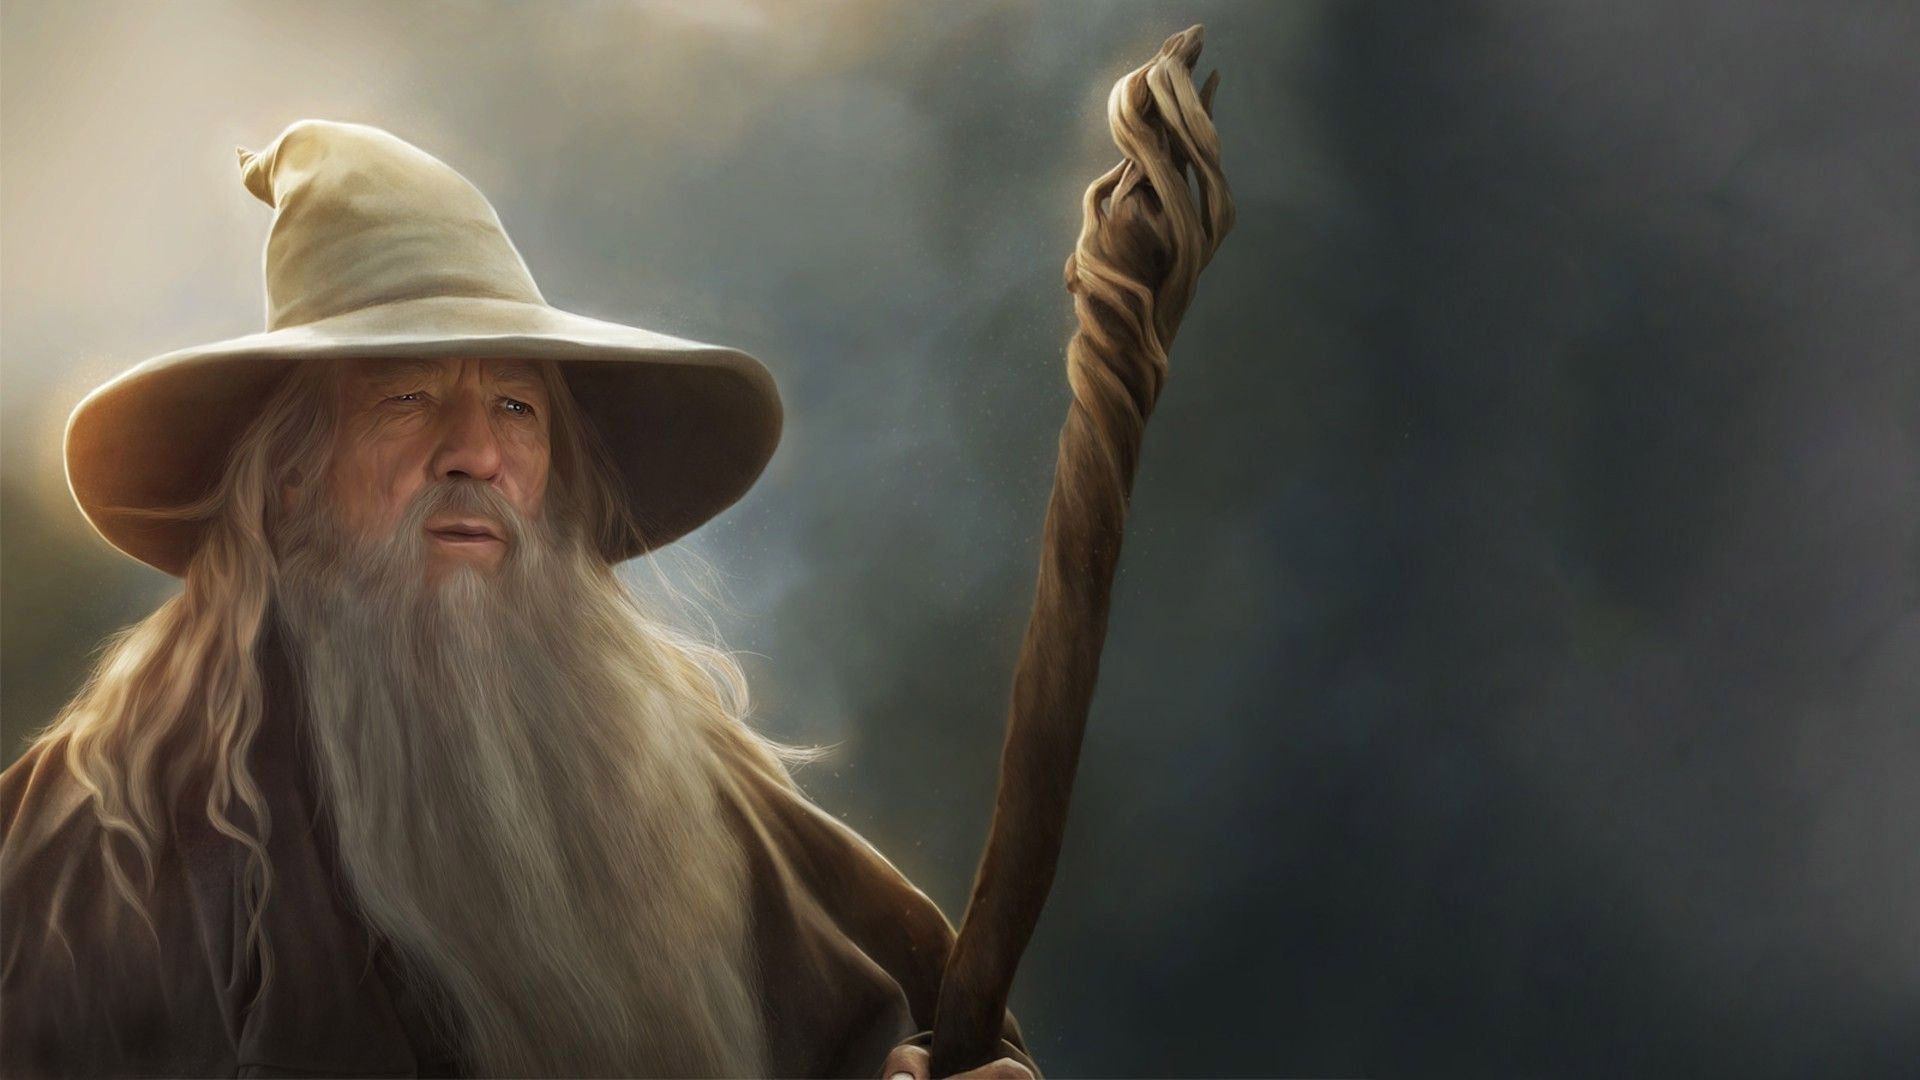 Gandalf the Wizard, Lord of the Rings wallpaper, Middle-earth realm, Epic fantasy, 1920x1080 Full HD Desktop